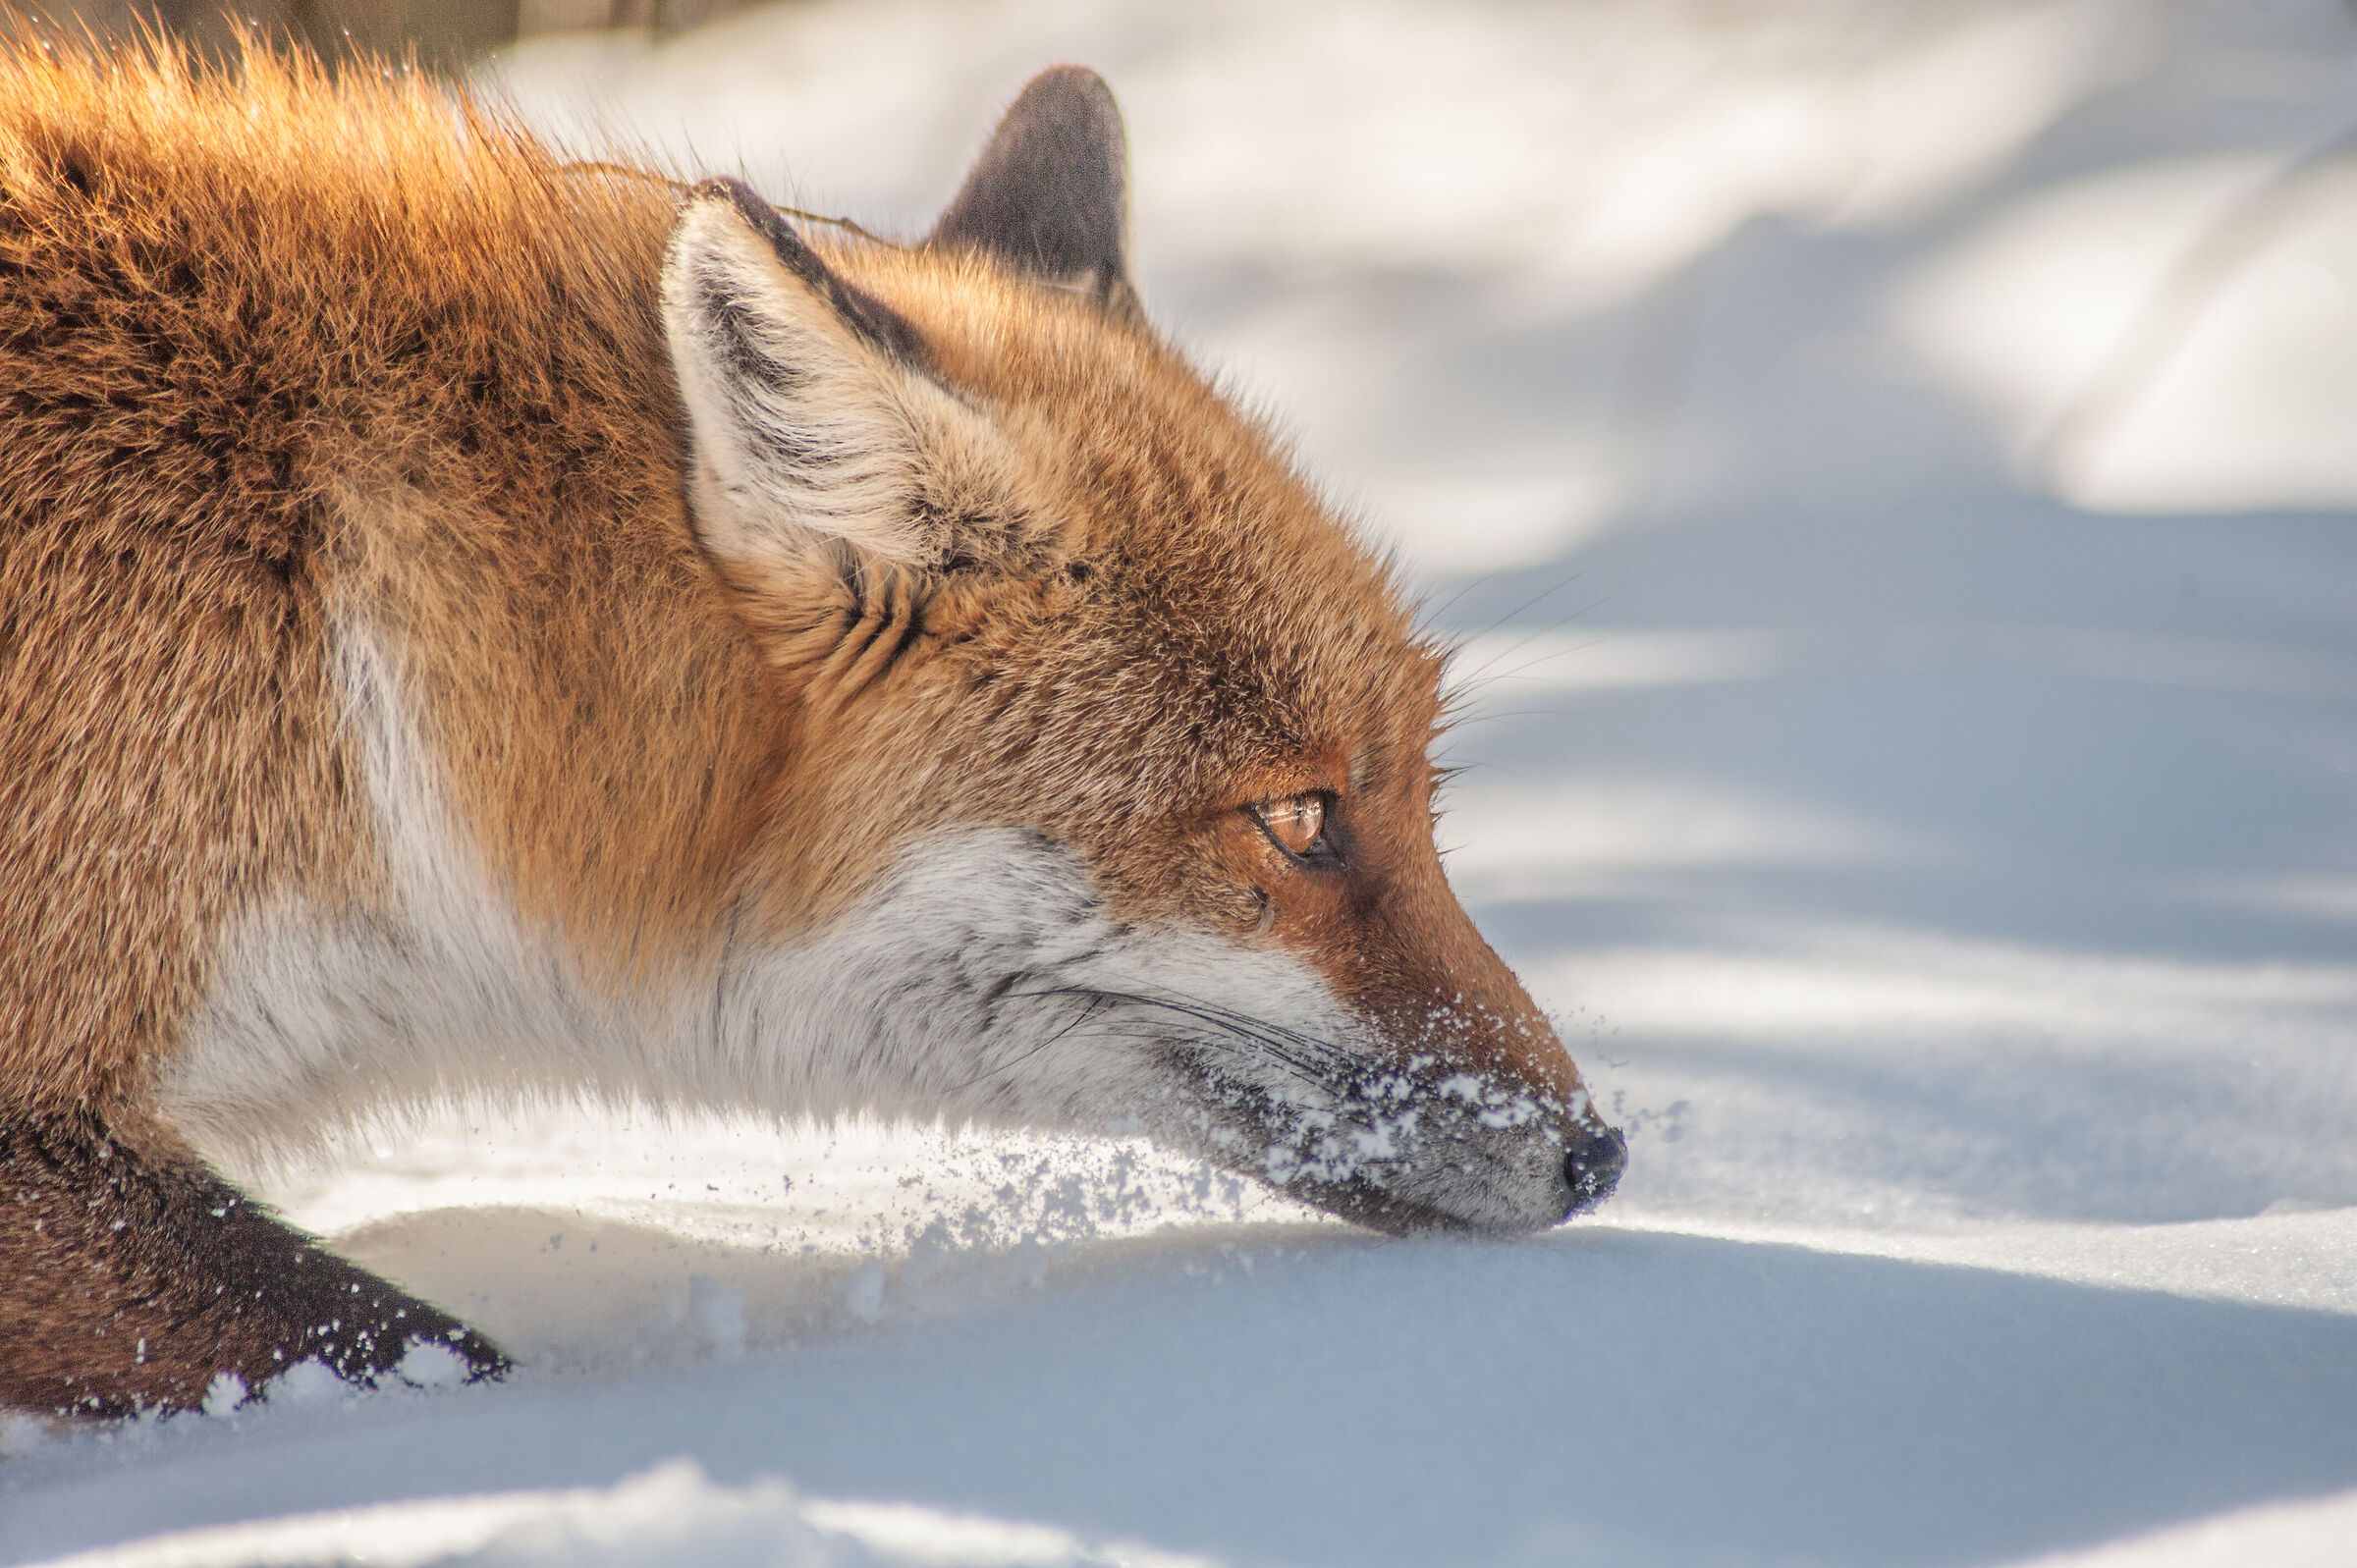 The fox and the snow...